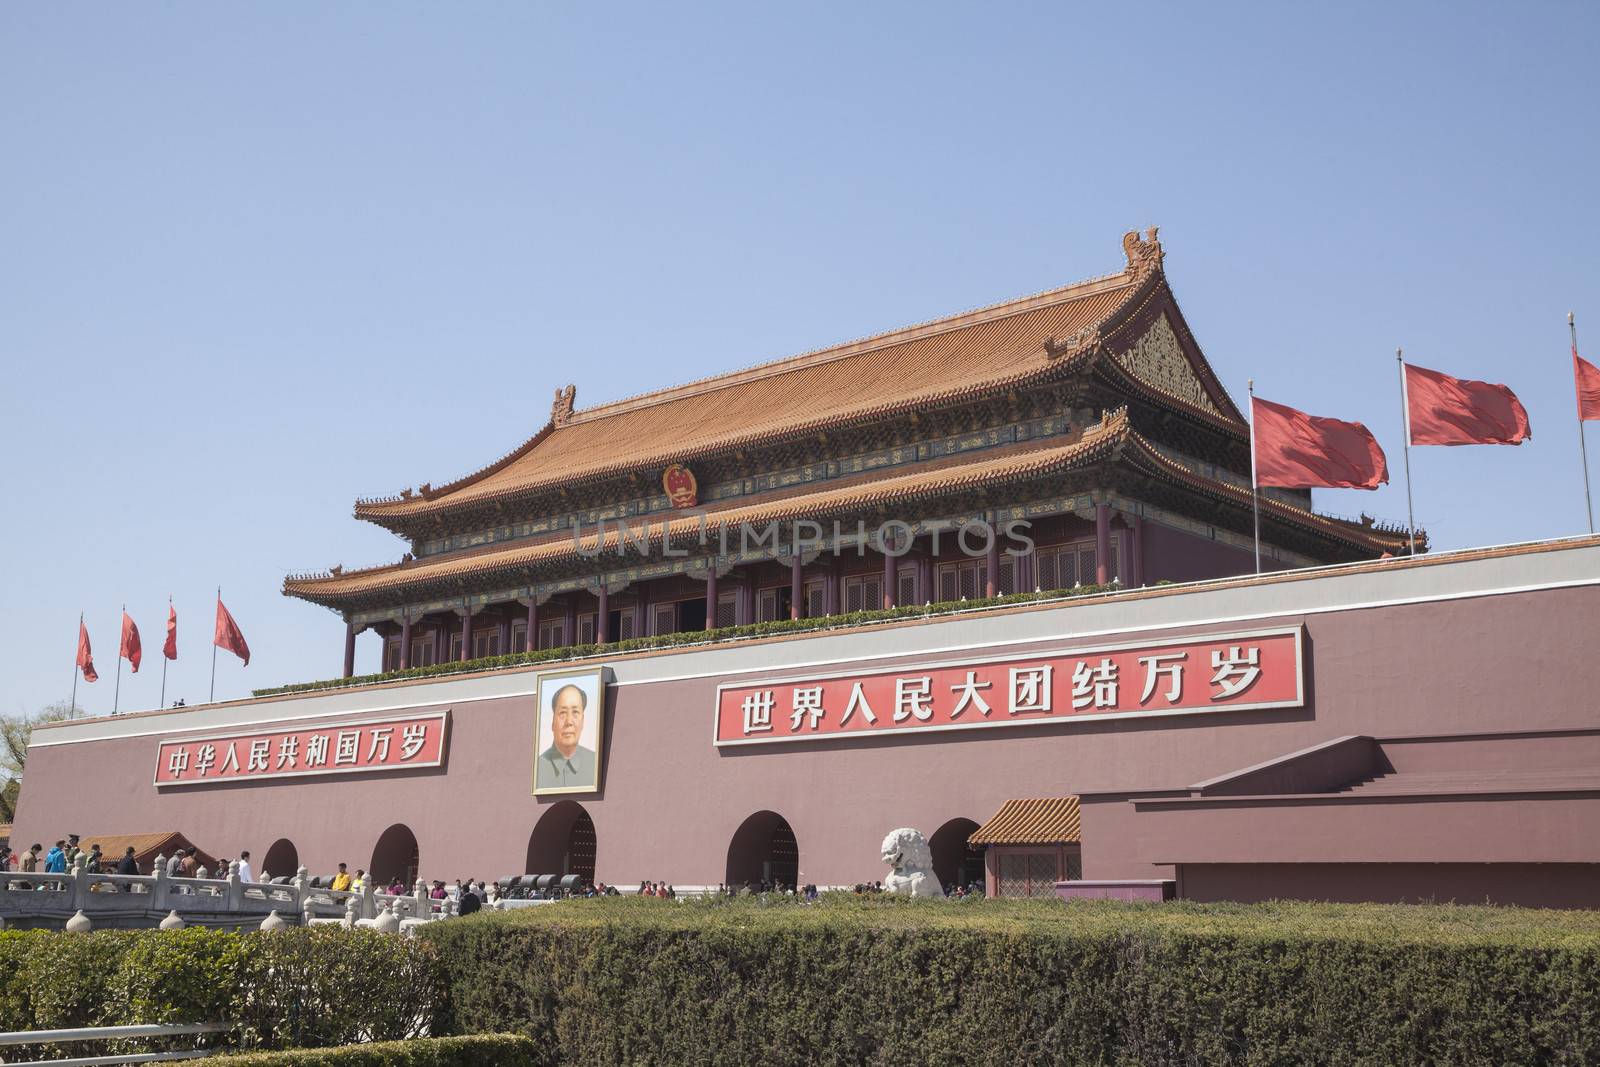 Tiananmen Square, Gate of Heavenly Peace with Mao's Portrait, Beijing, China. by XiXinXing